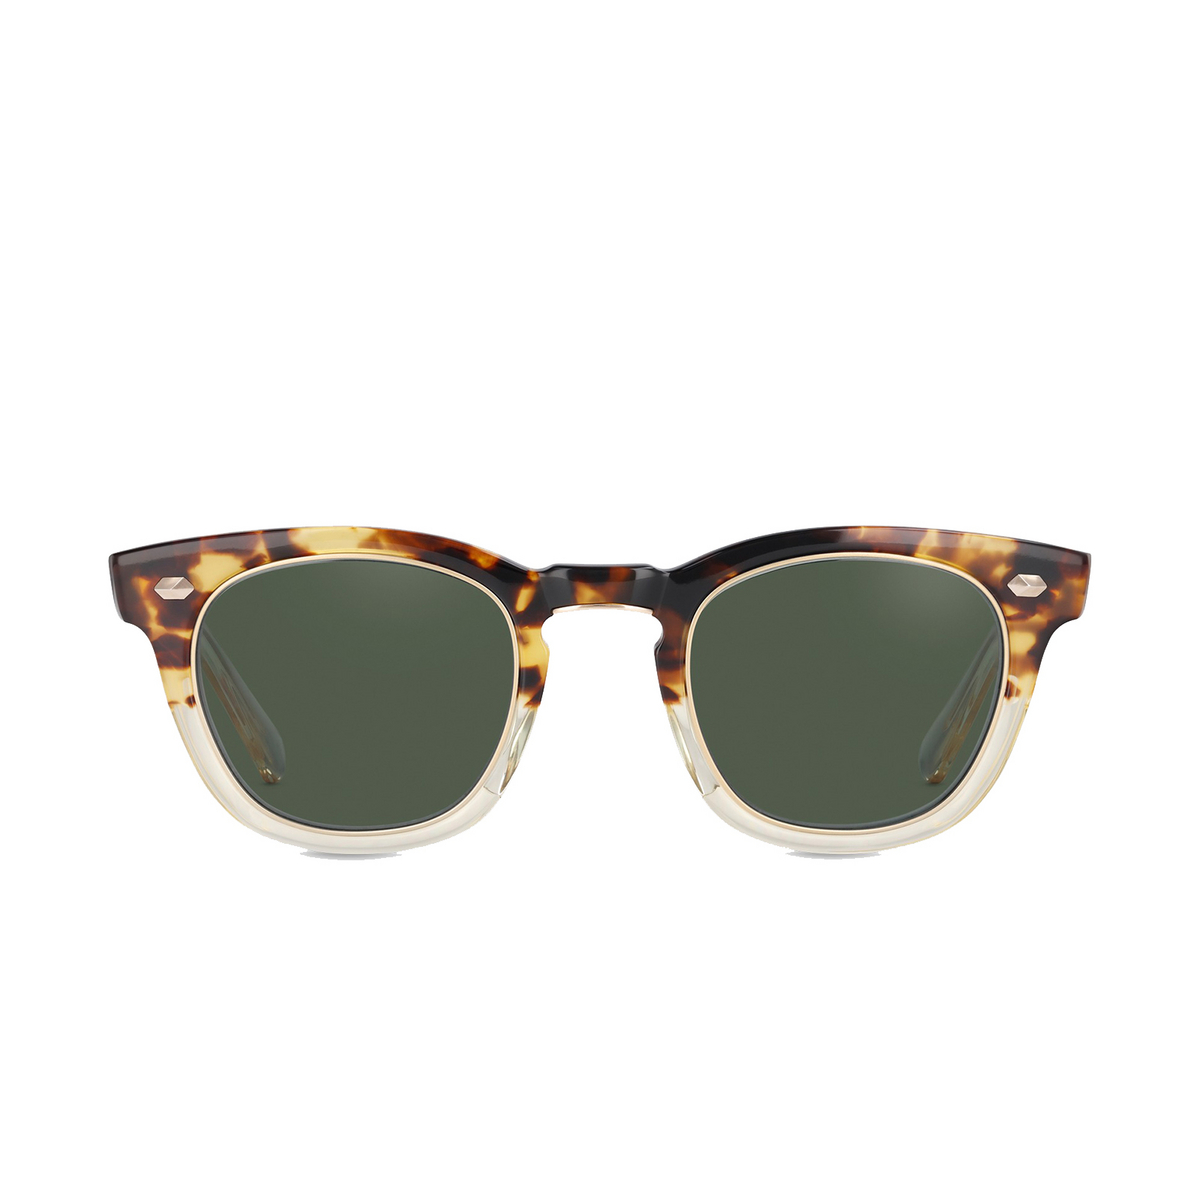 Mr. Leight® Square Sunglasses: Hanalei S color DTORT-12KWG-ART - front view.